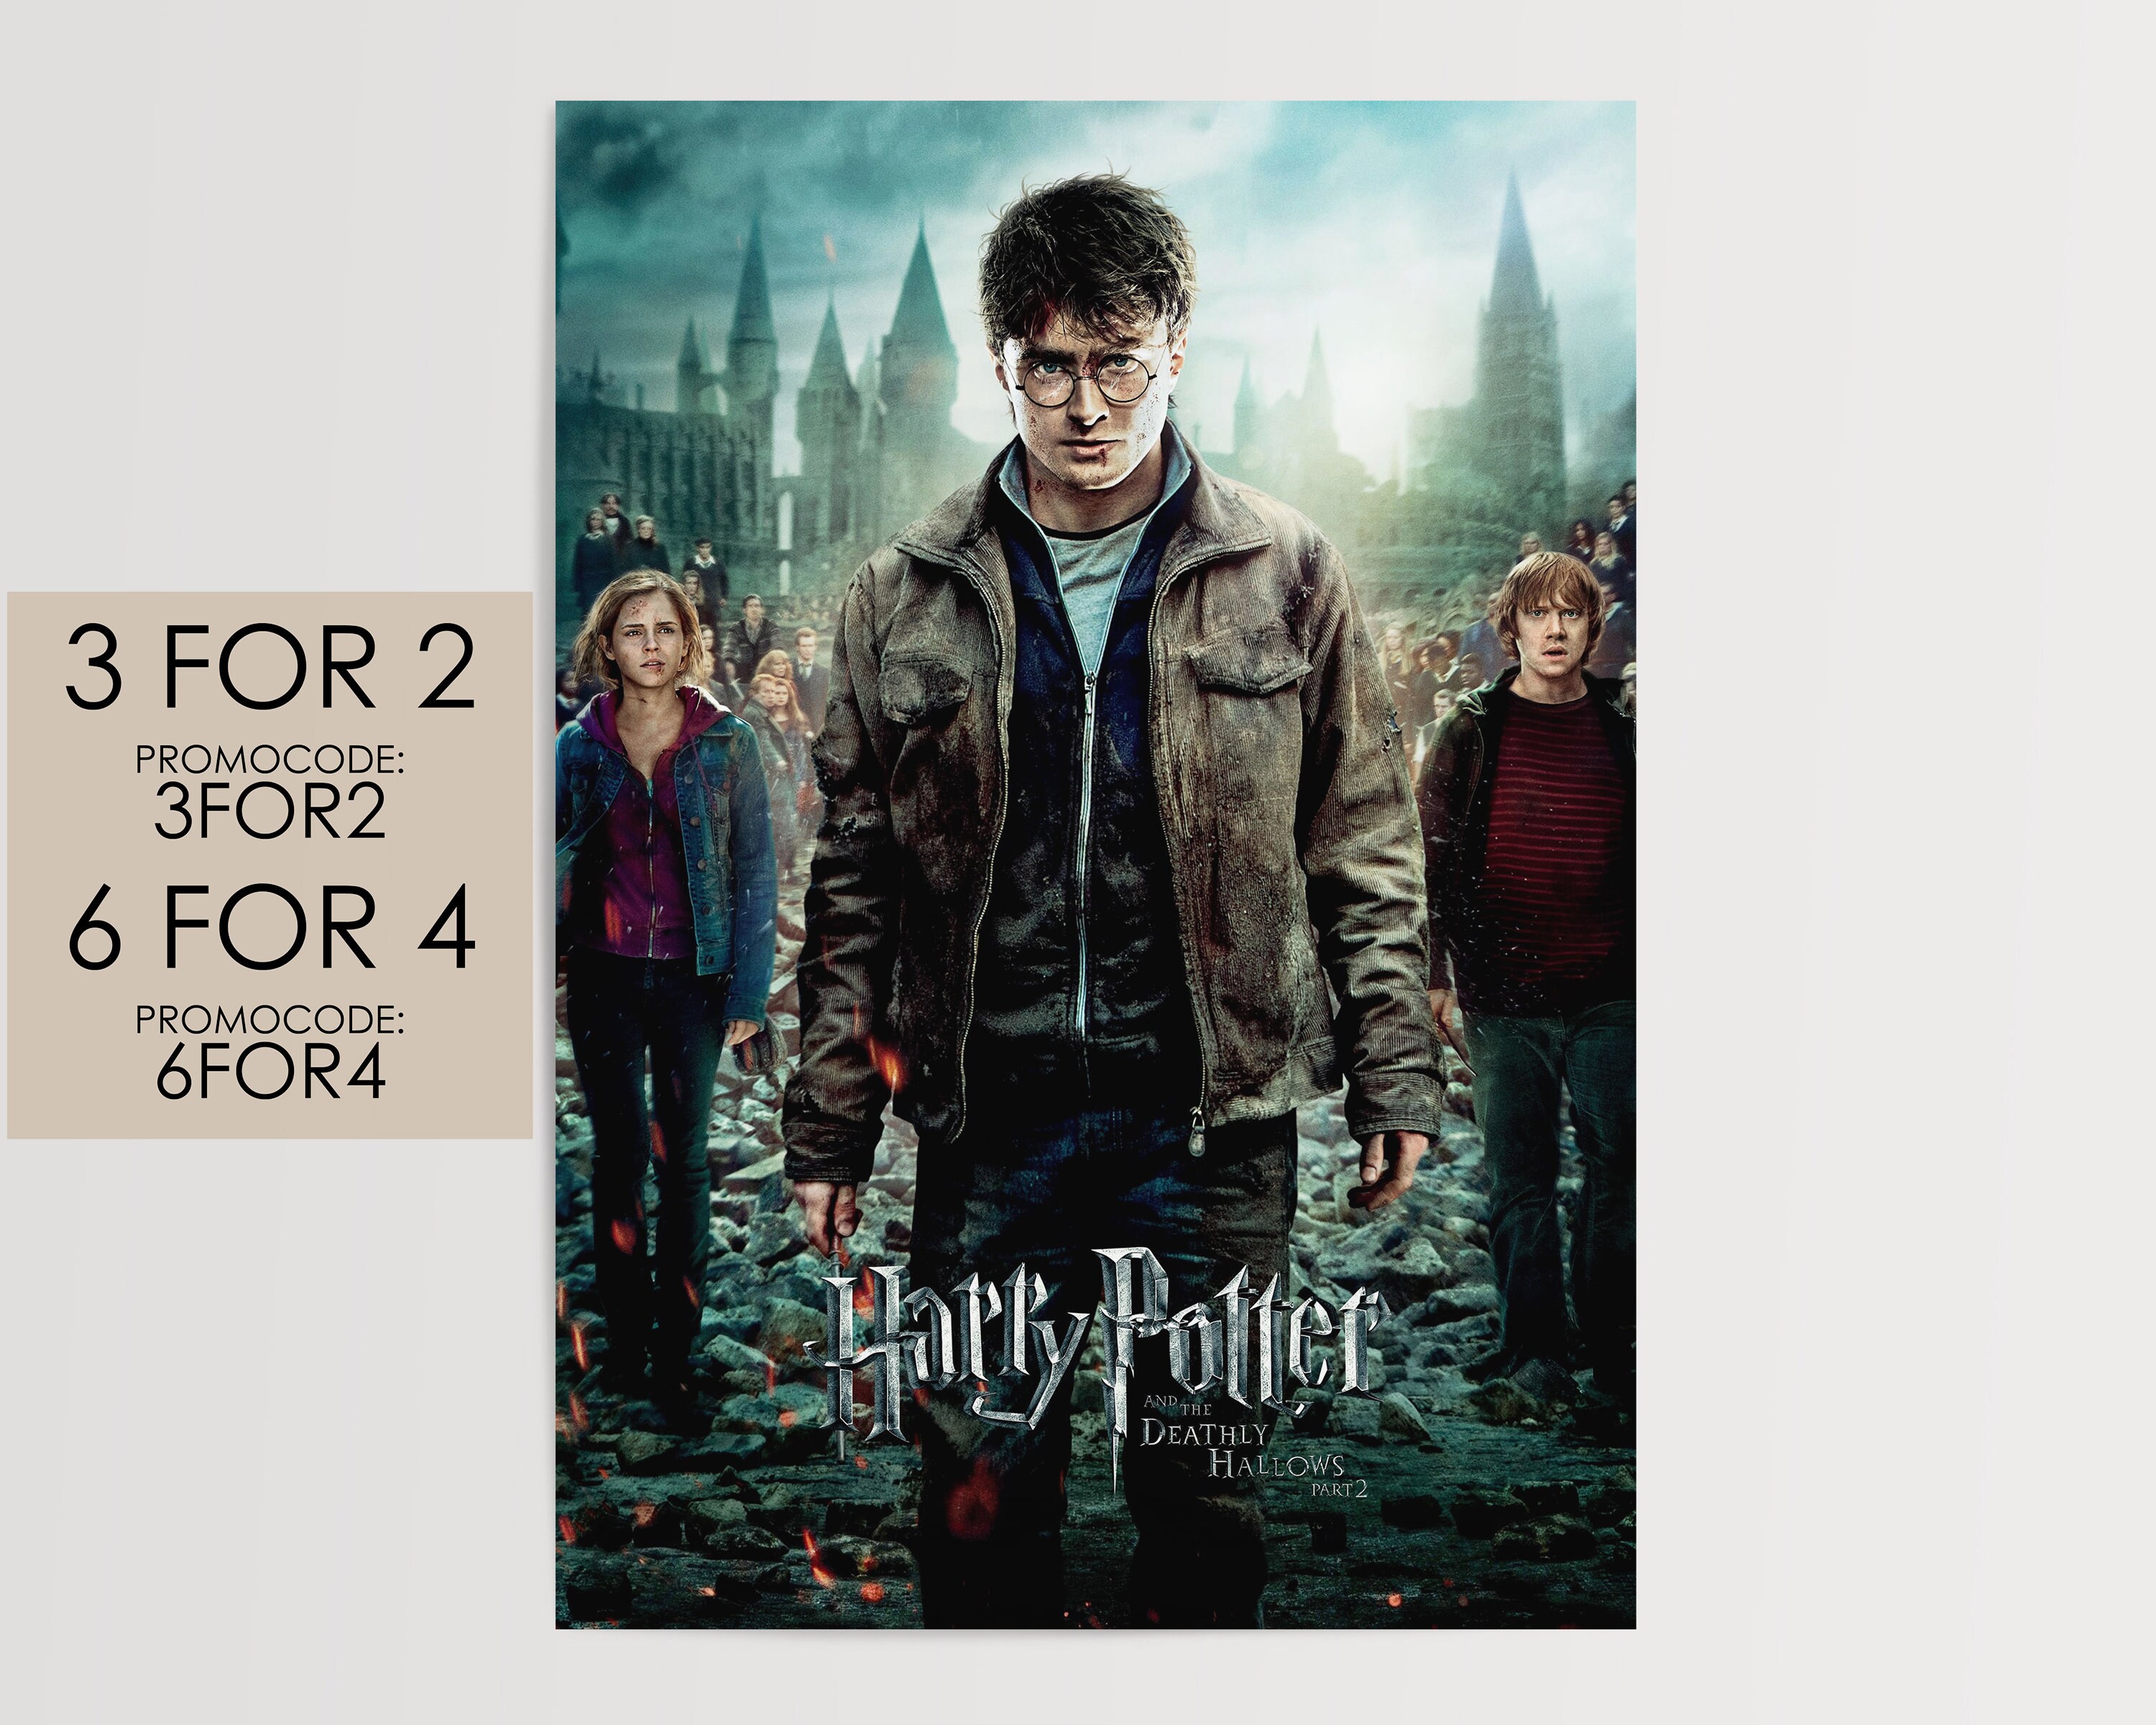 Poster Harry Potter 7 Harry Potter and The Deathly Hallows – Part 1 Affiche  cinéma Wall Art